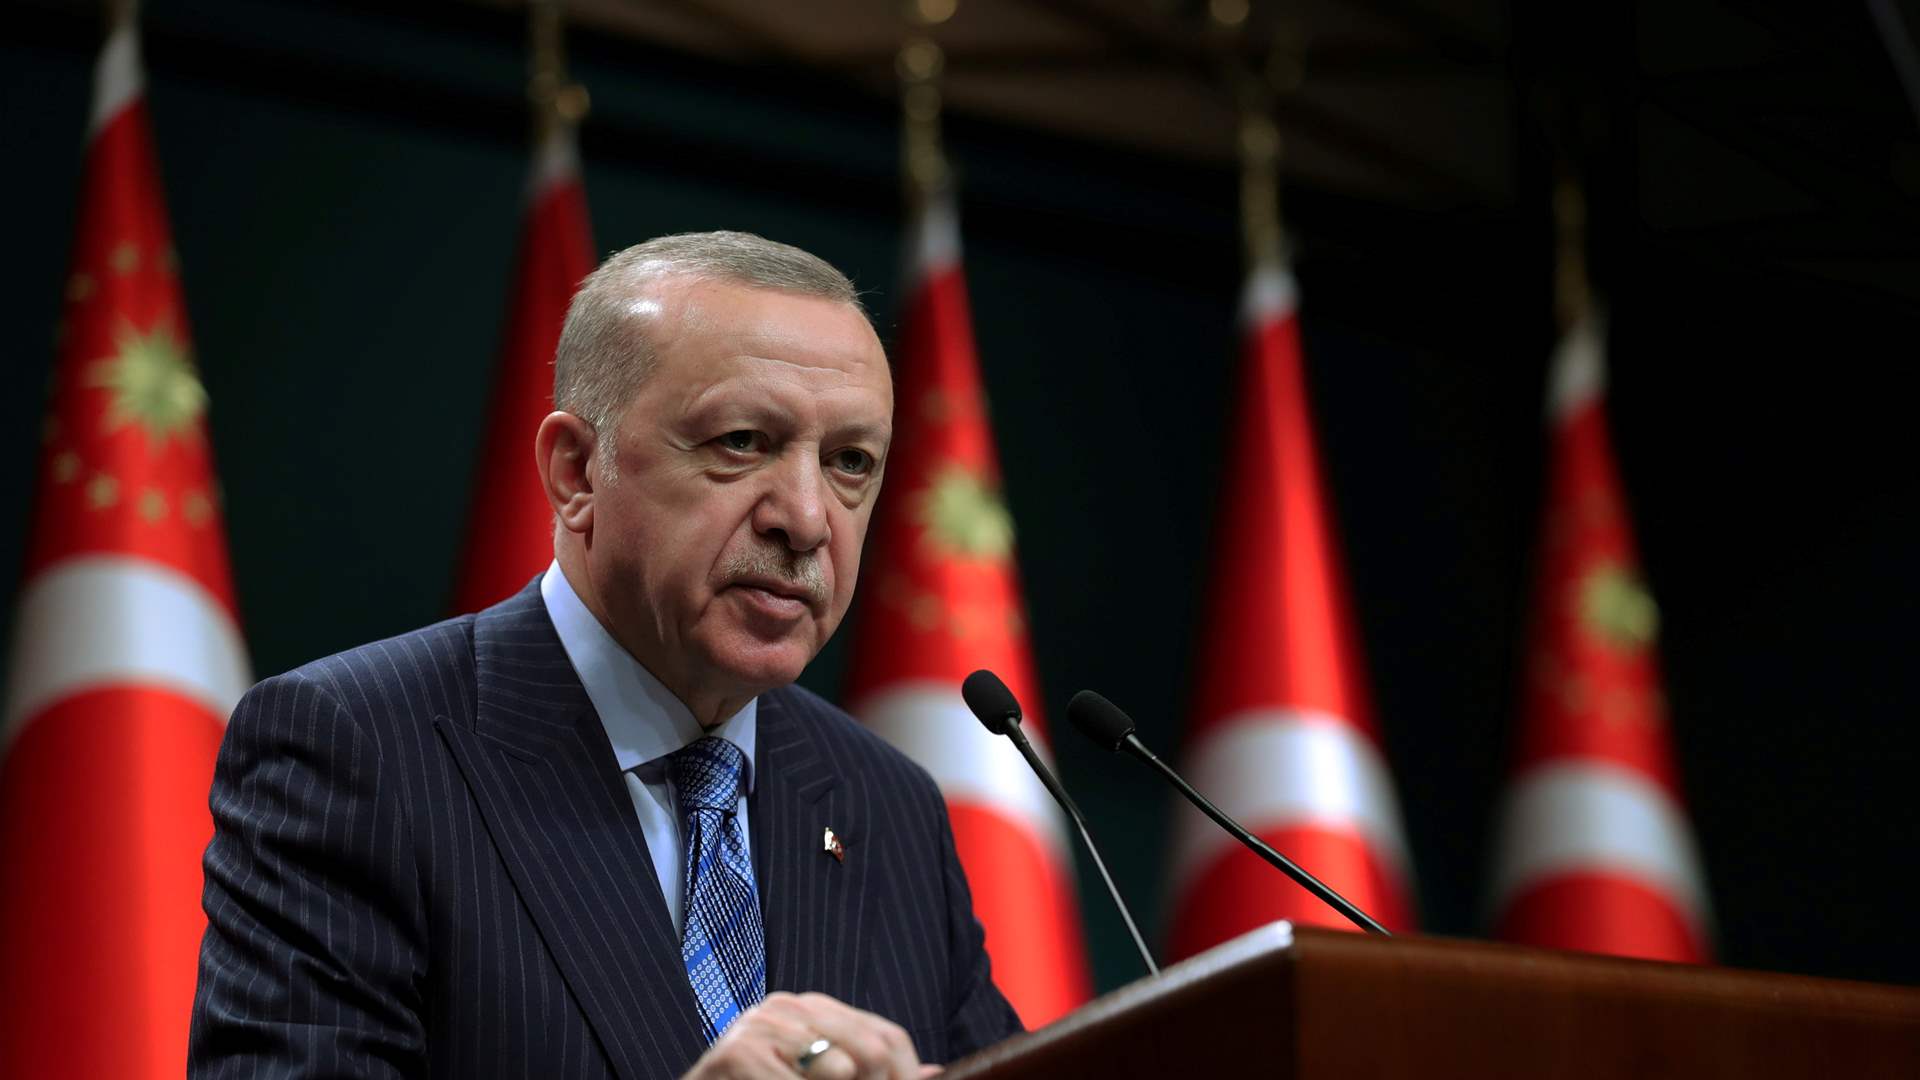 Erdogan says Netanyahu&#39;s solely responsible for recent Middle East tensions